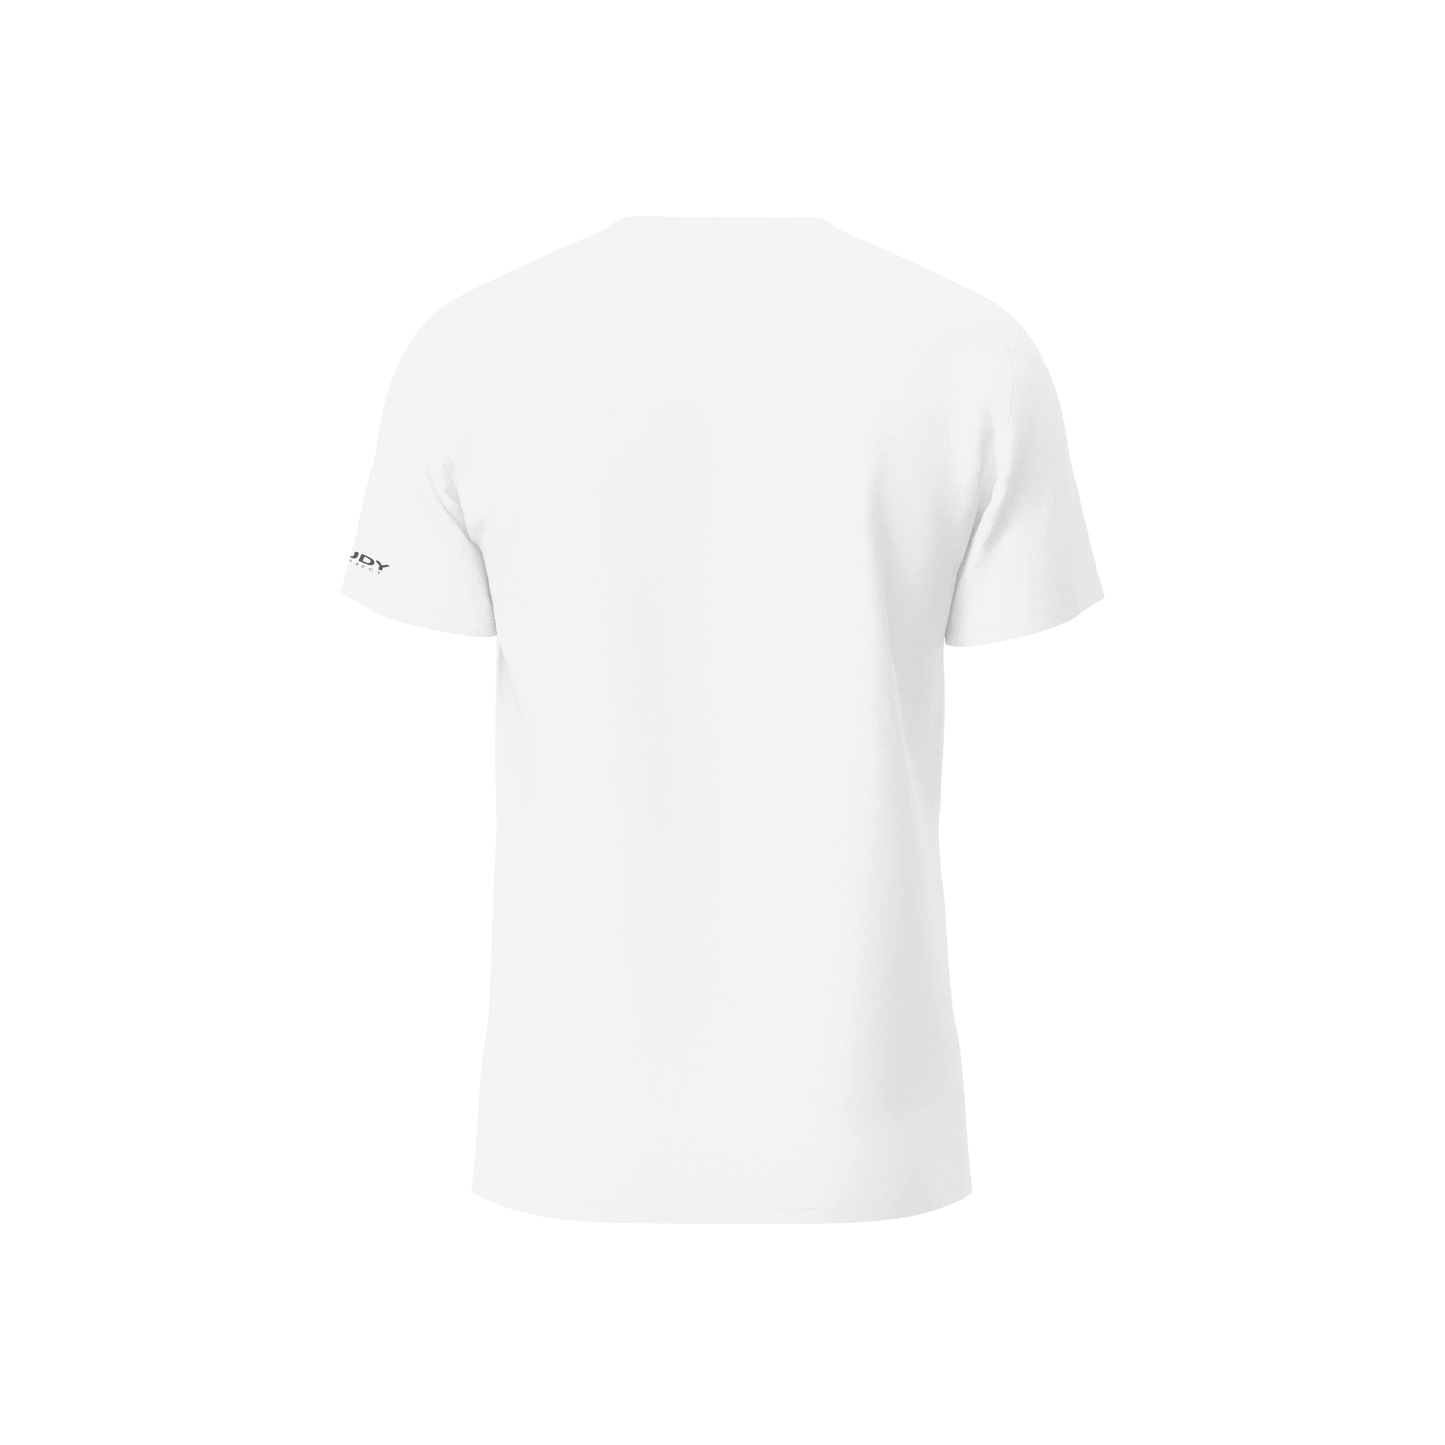 #FasterWithRudyProject Active Tee White